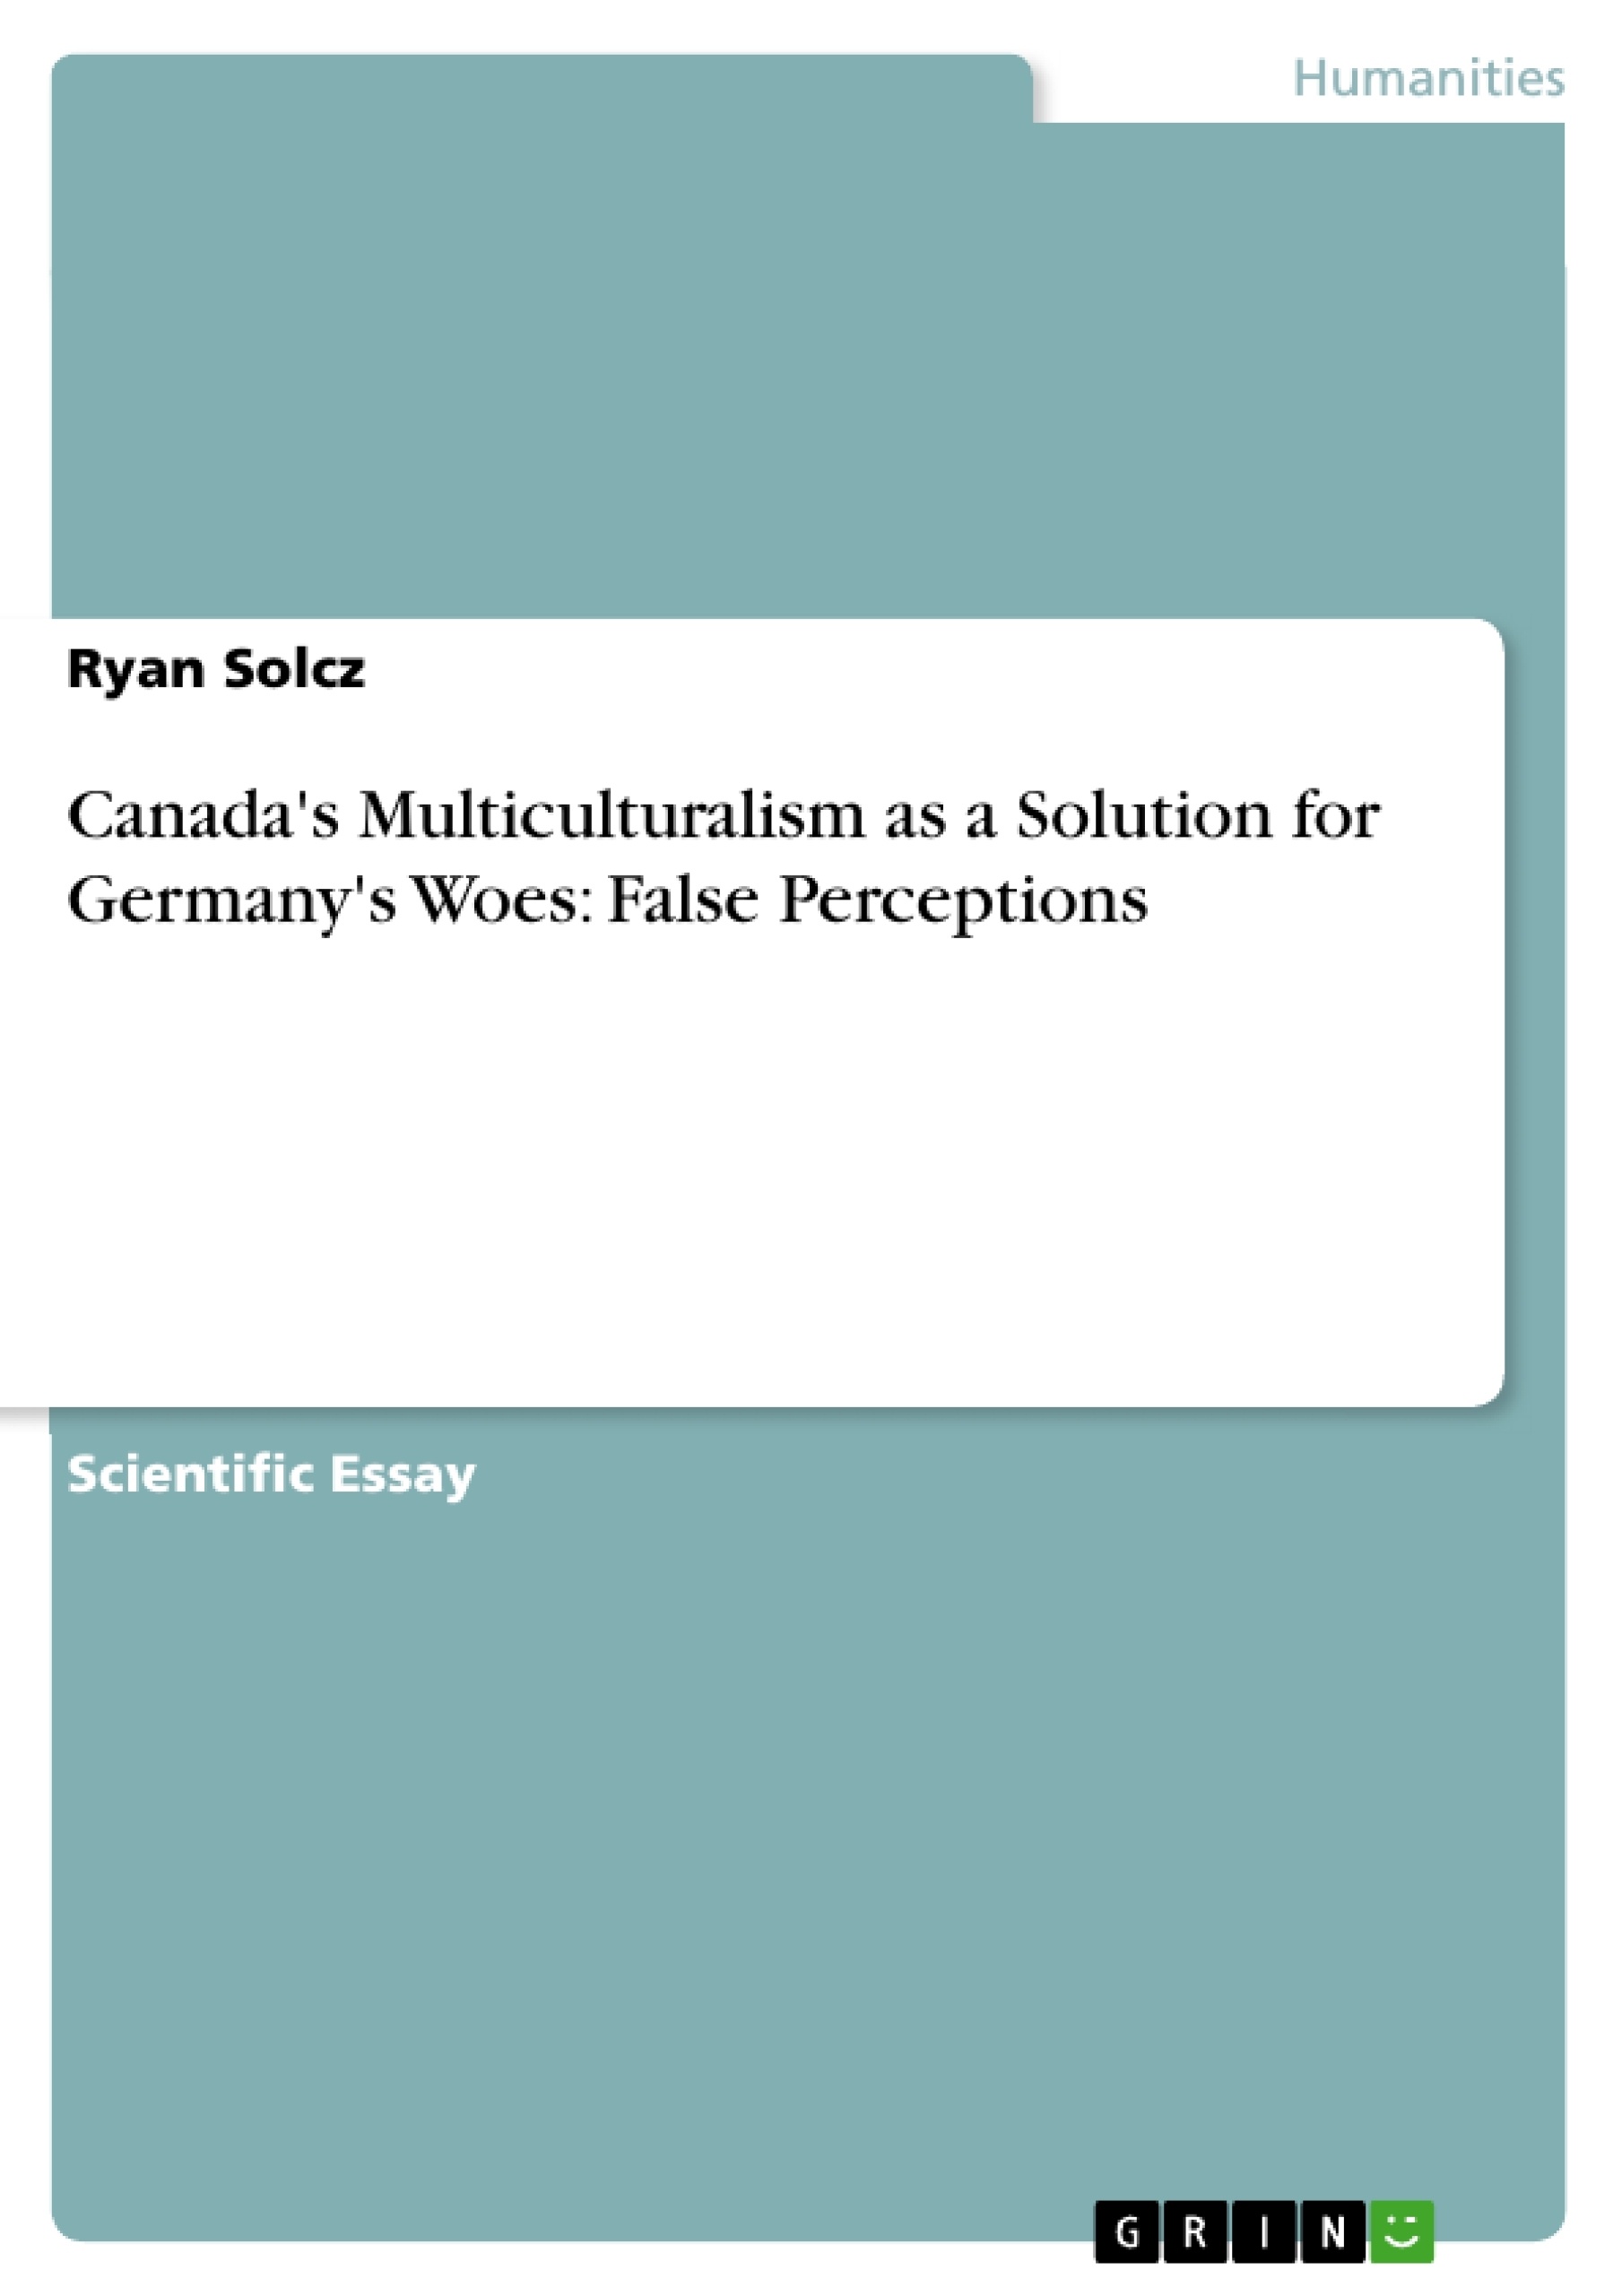 Titre: Canada's Multiculturalism as a Solution for Germany's Woes: False Perceptions